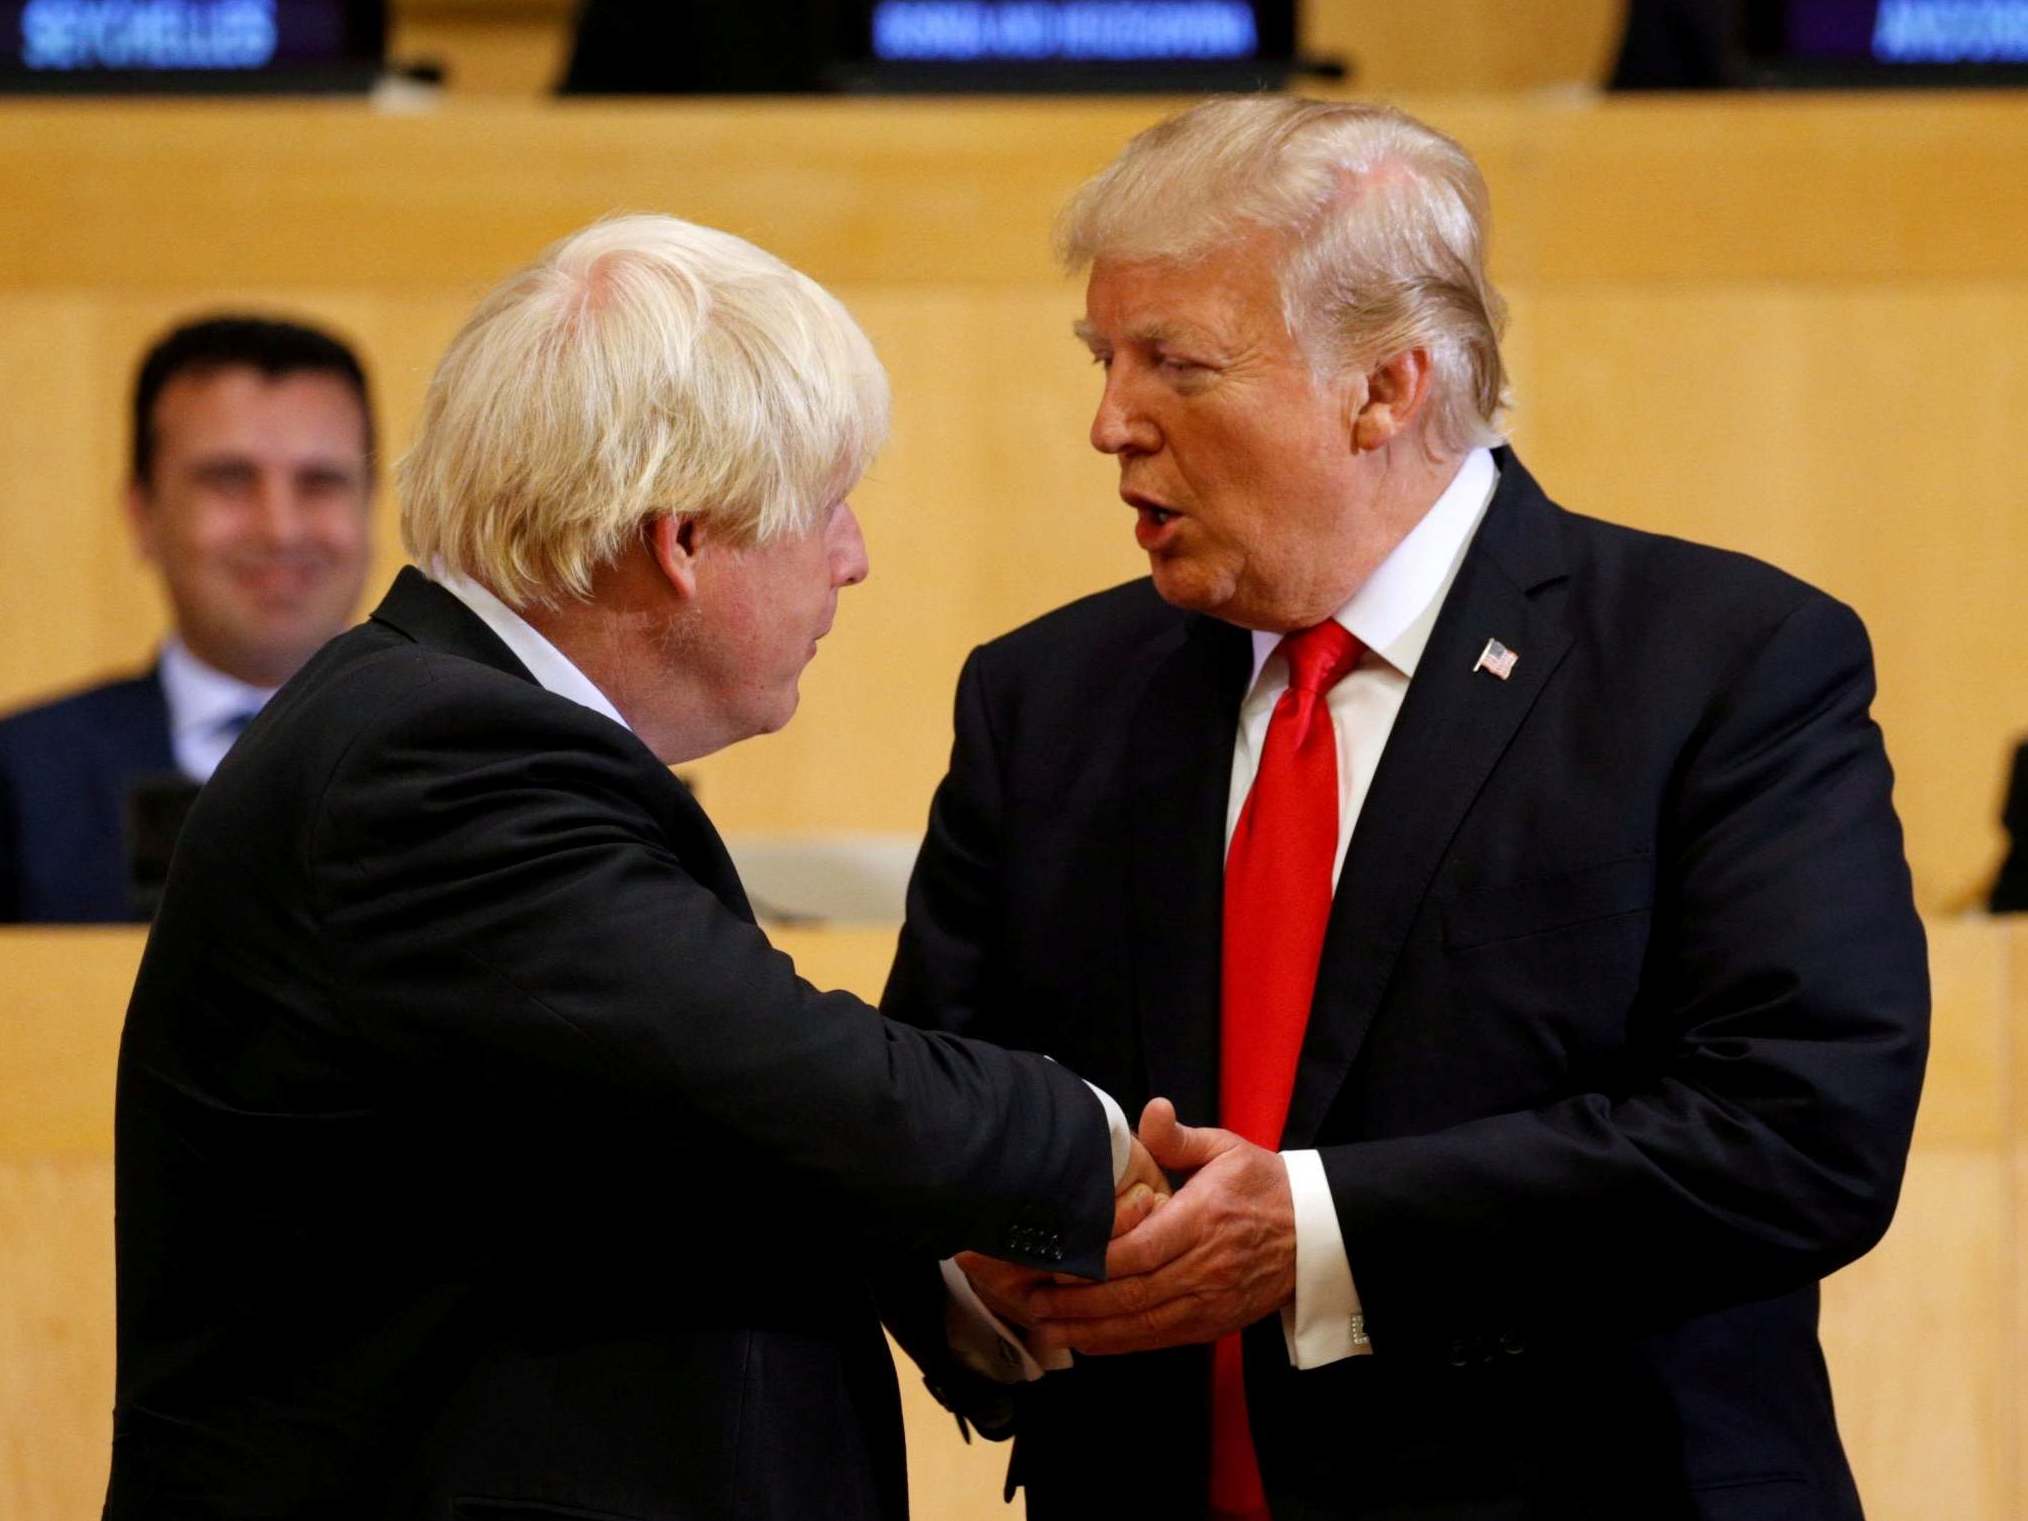 Donald Trump shakes hands with Boris Johnson while the former was foreign secretary in September, 2017